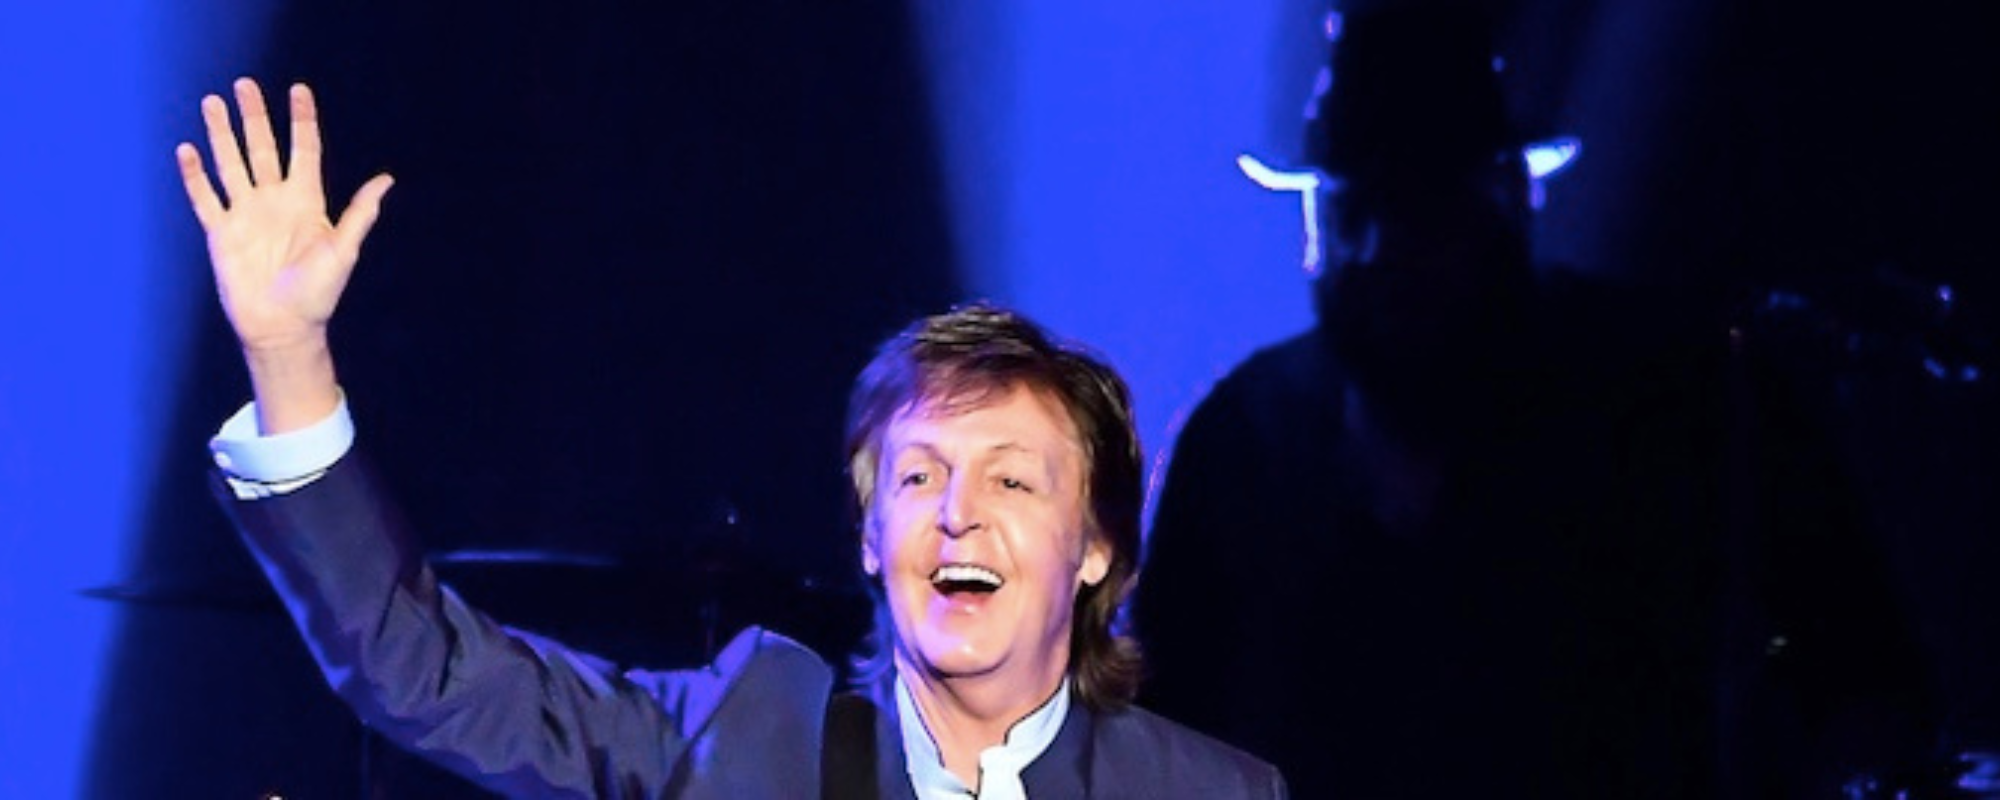 Watch: Paul McCartney Performs the Beatles Classic “Hey Jude” in Mexico City